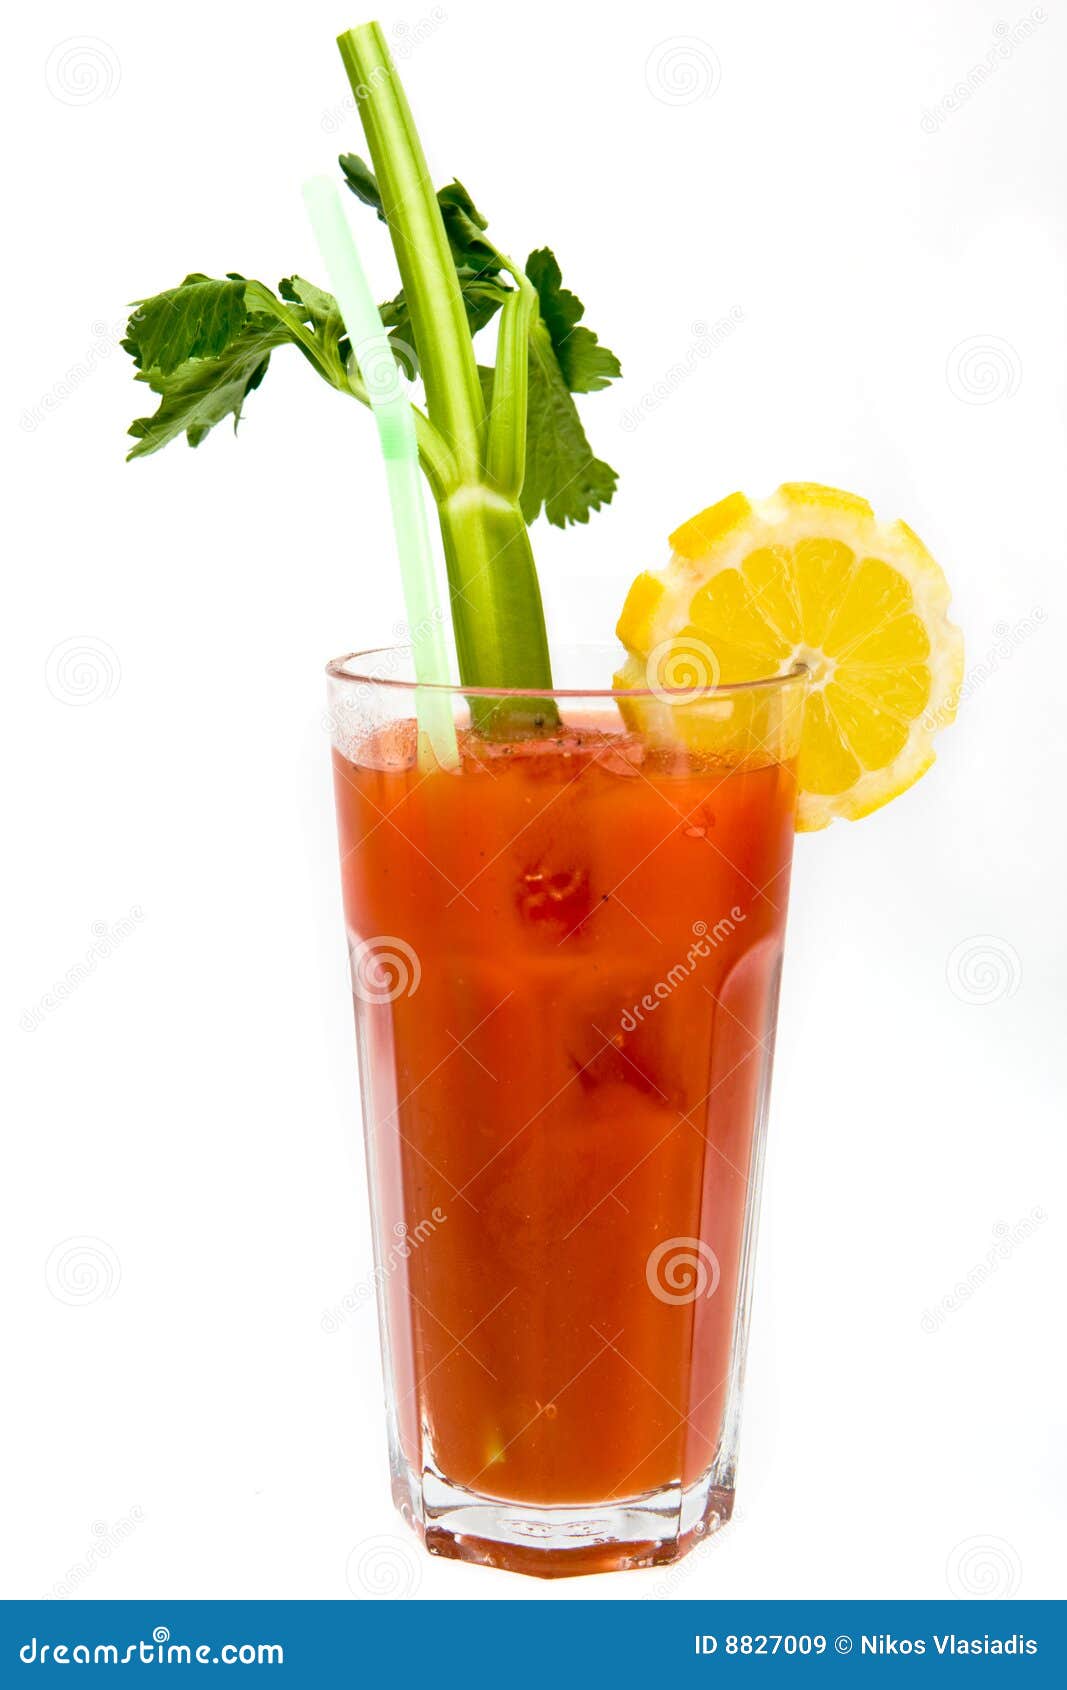 clipart bloody mary - photo #21